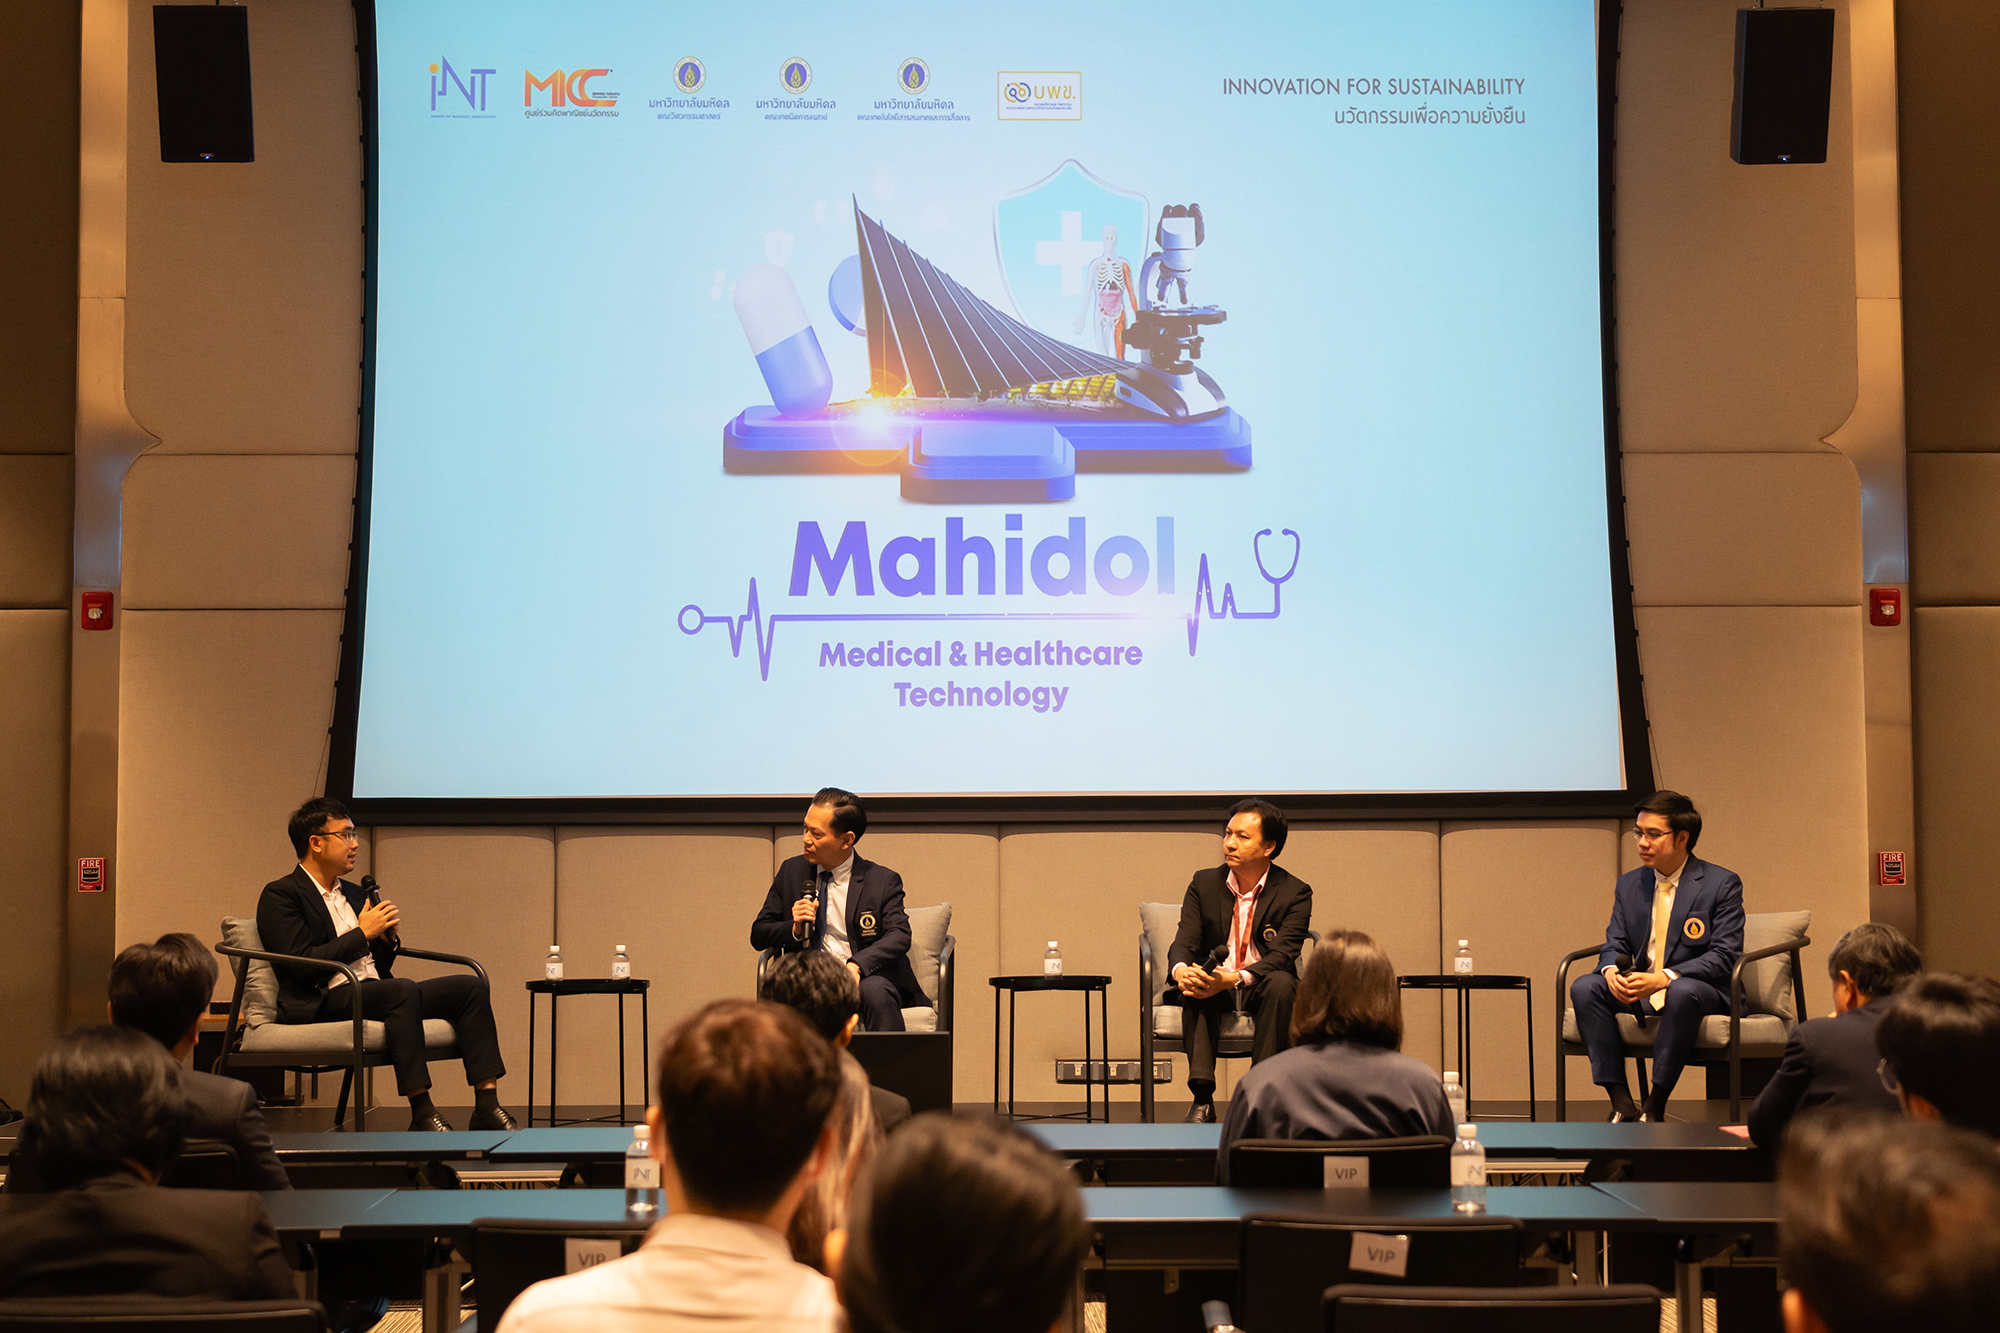 Mahidol and Medical & Healthcare Technology